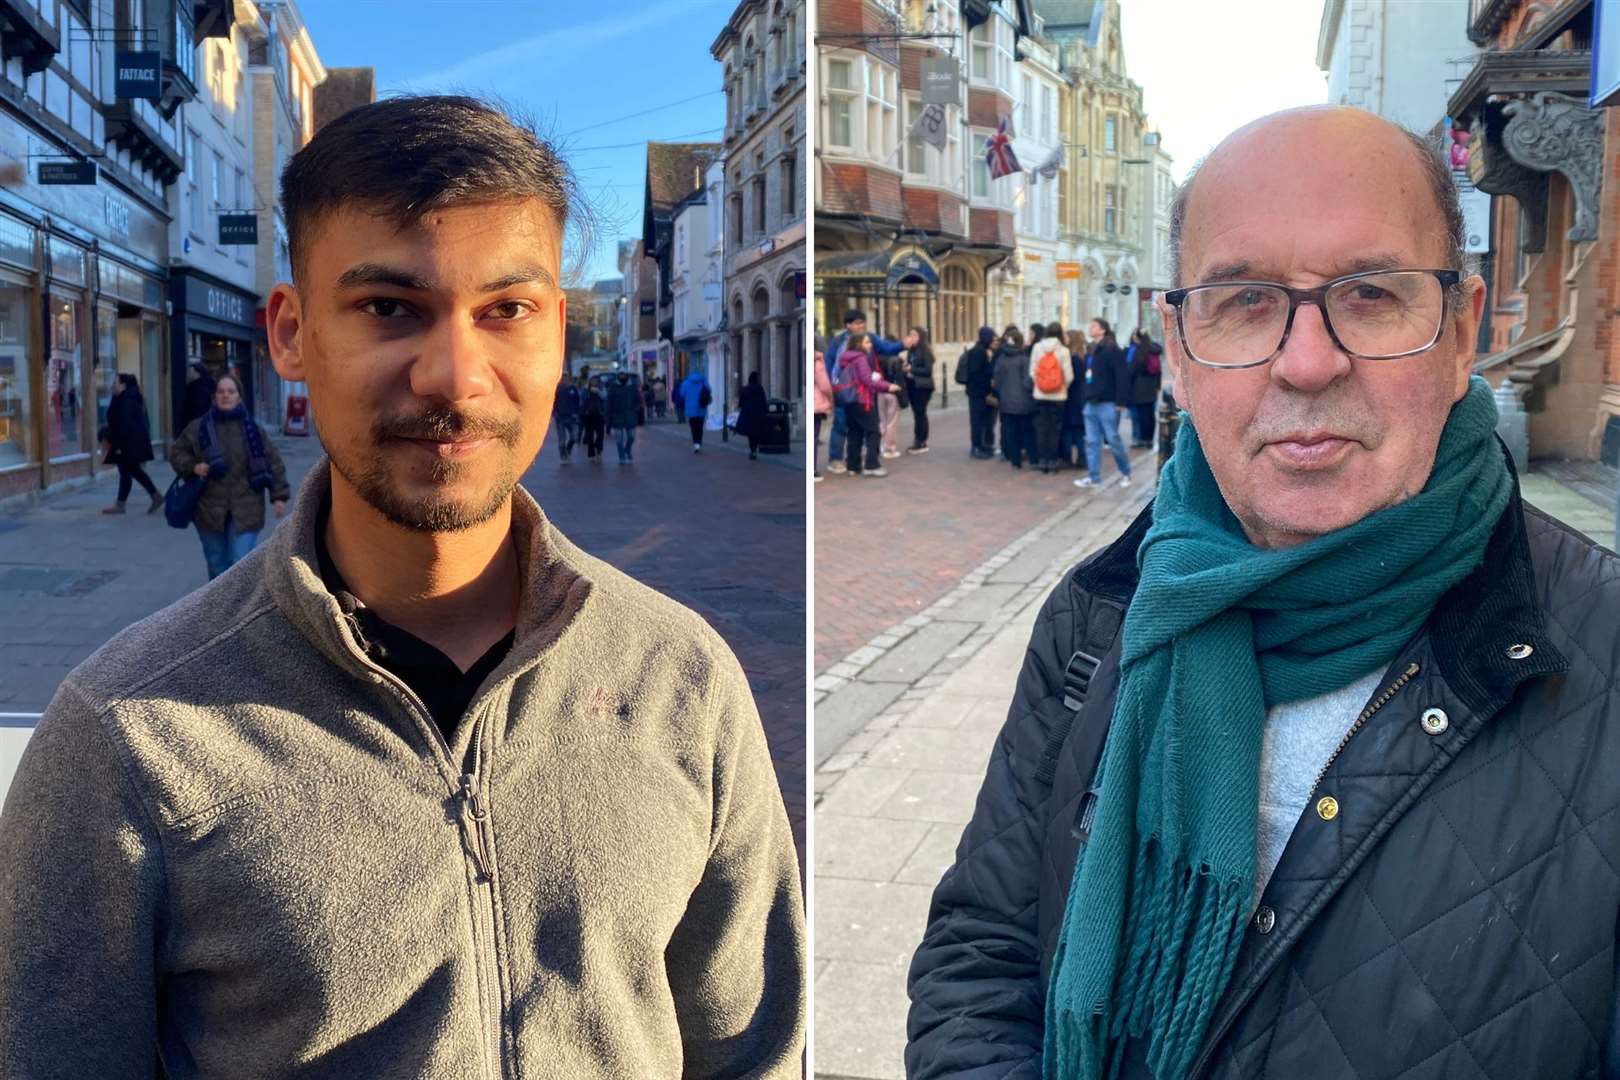 Canterbury residents Devvrat Singh and Tony Baker have differing opinions on the scheme